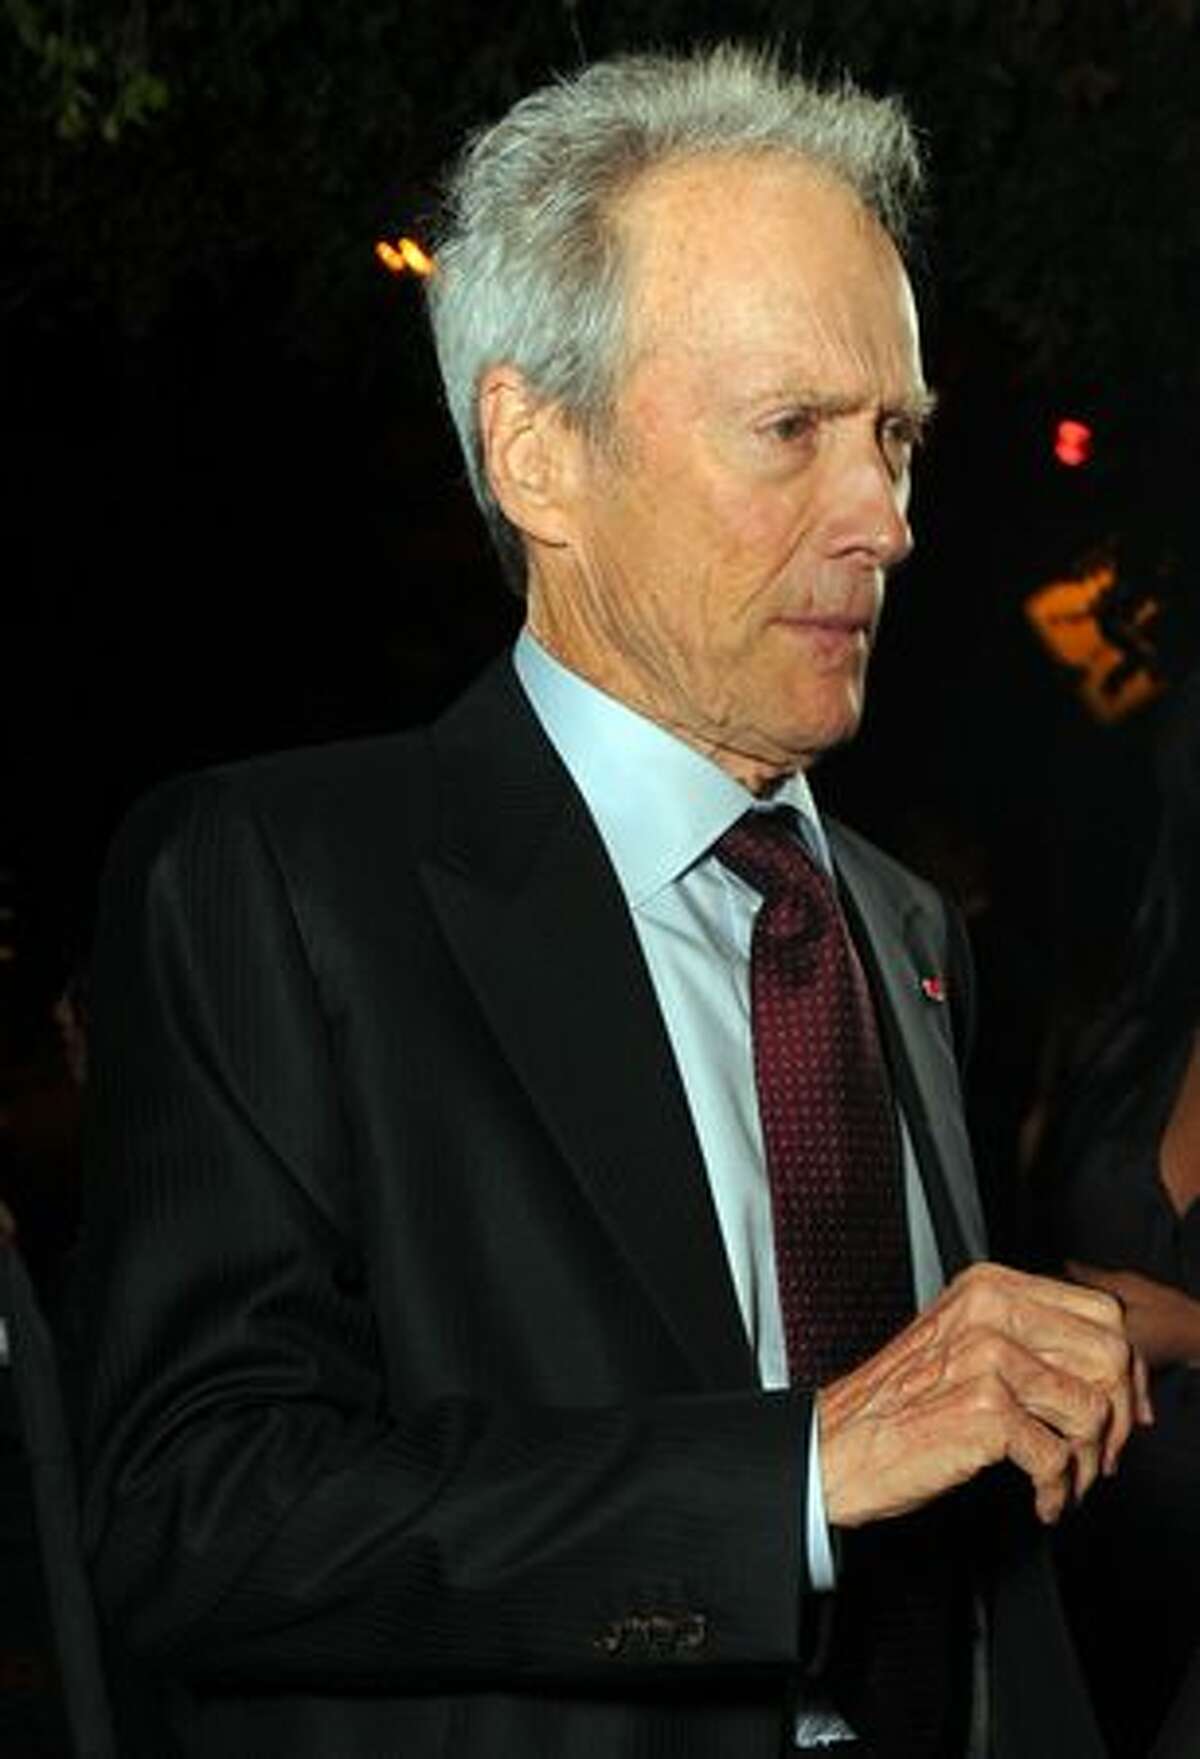 Actor/director Clint Eastwood attends the party.